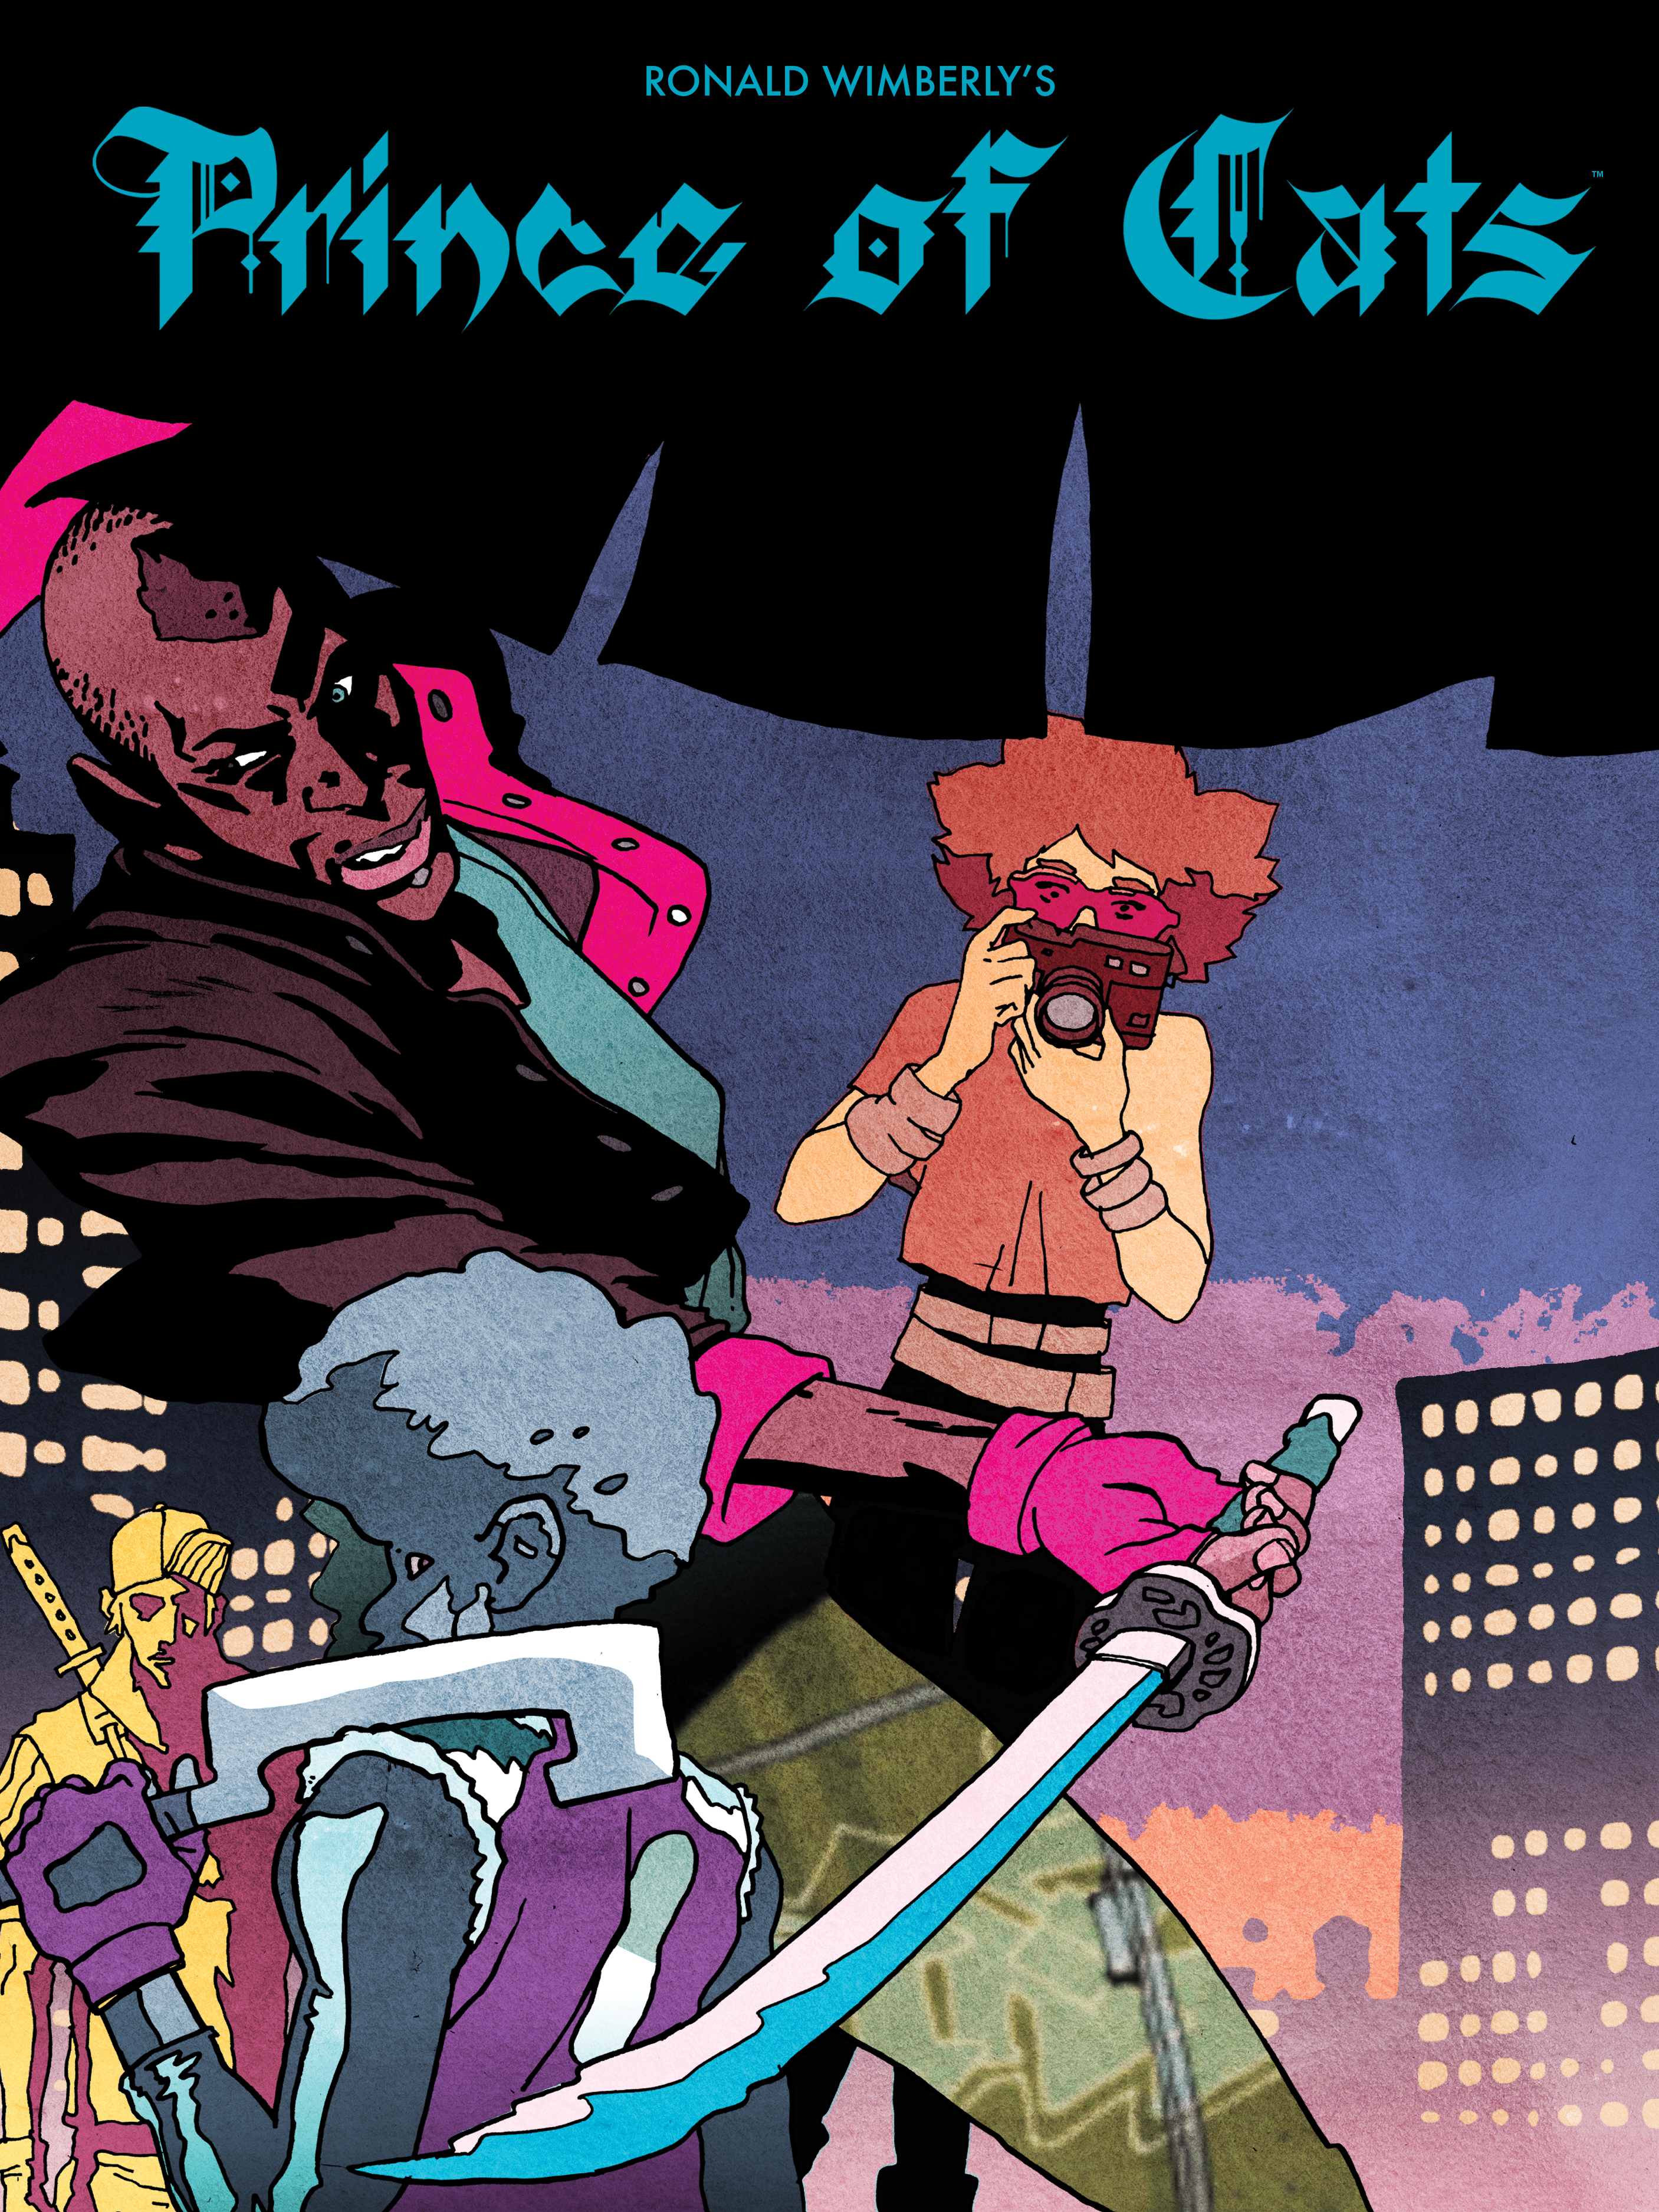 The 100 Best Comics of the Decade: Prince of Cats